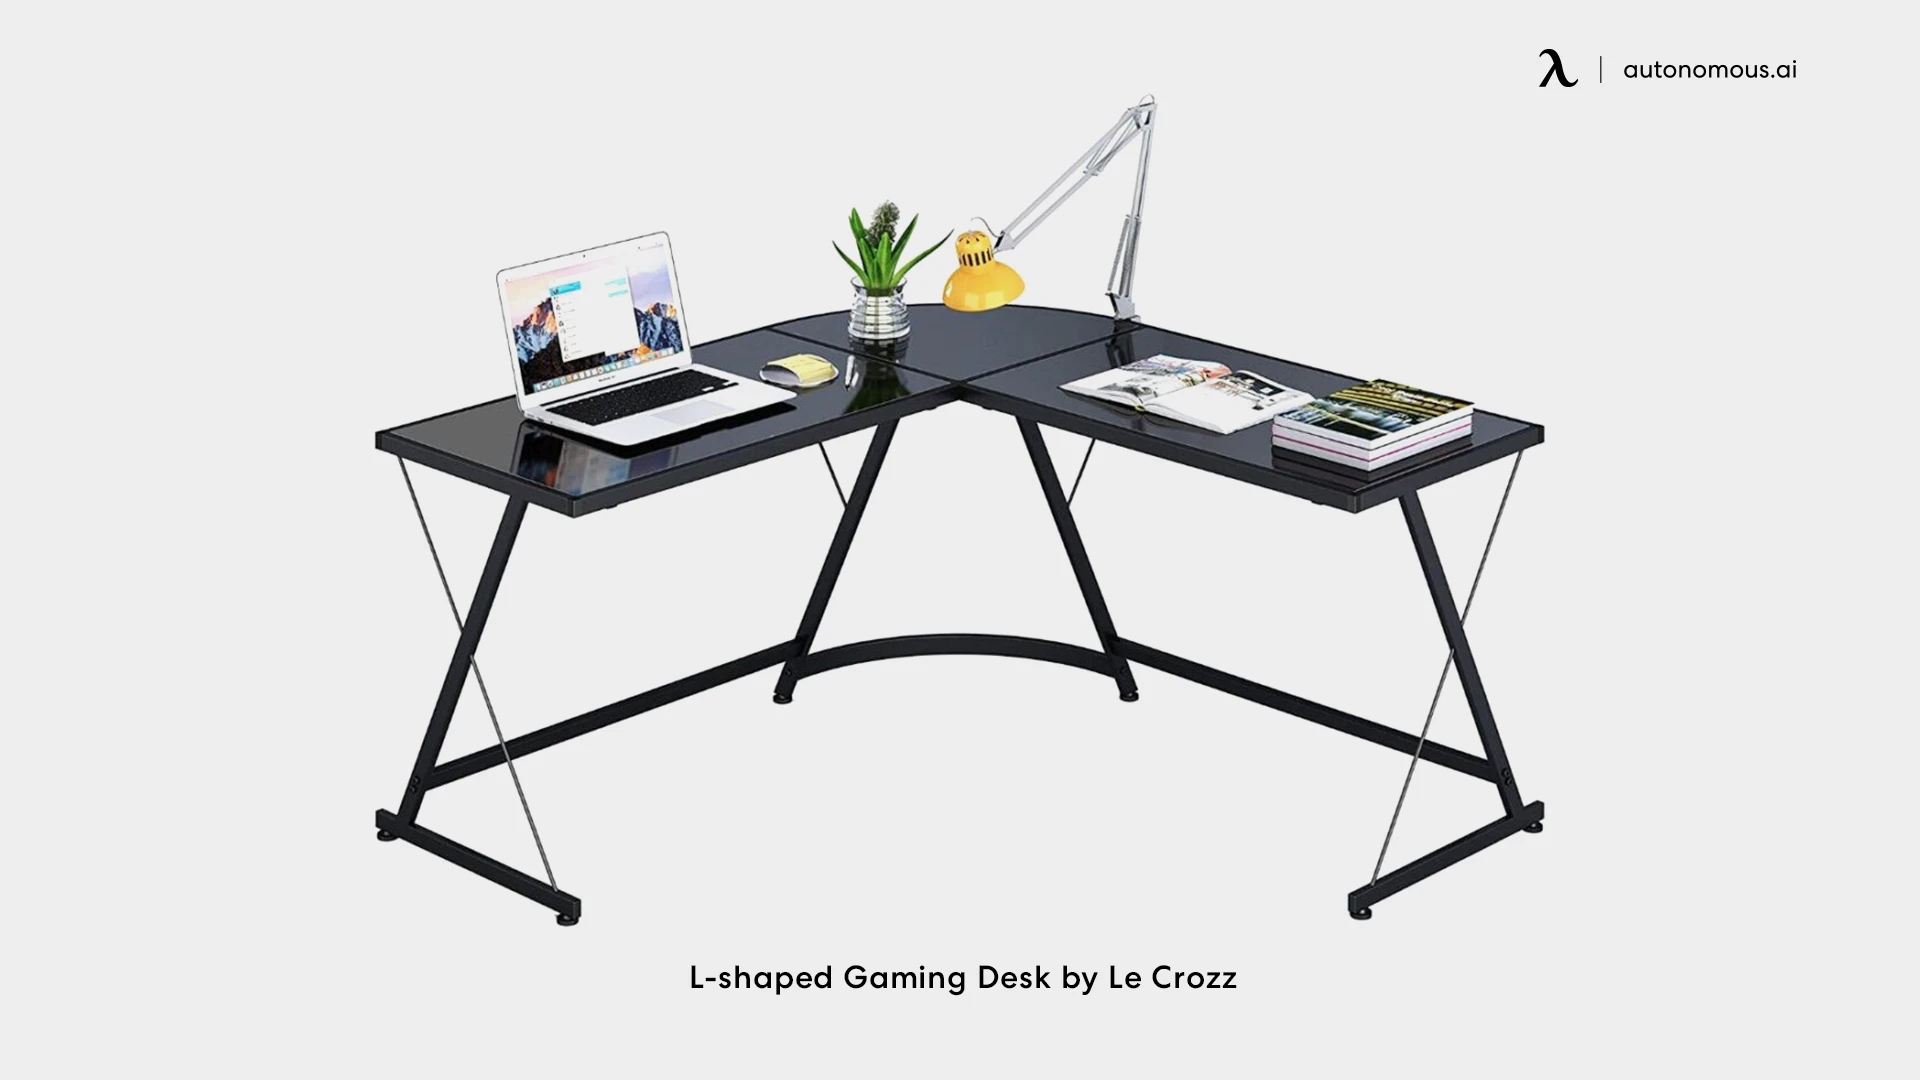 L-shaped Gaming Desk by Le Crozz